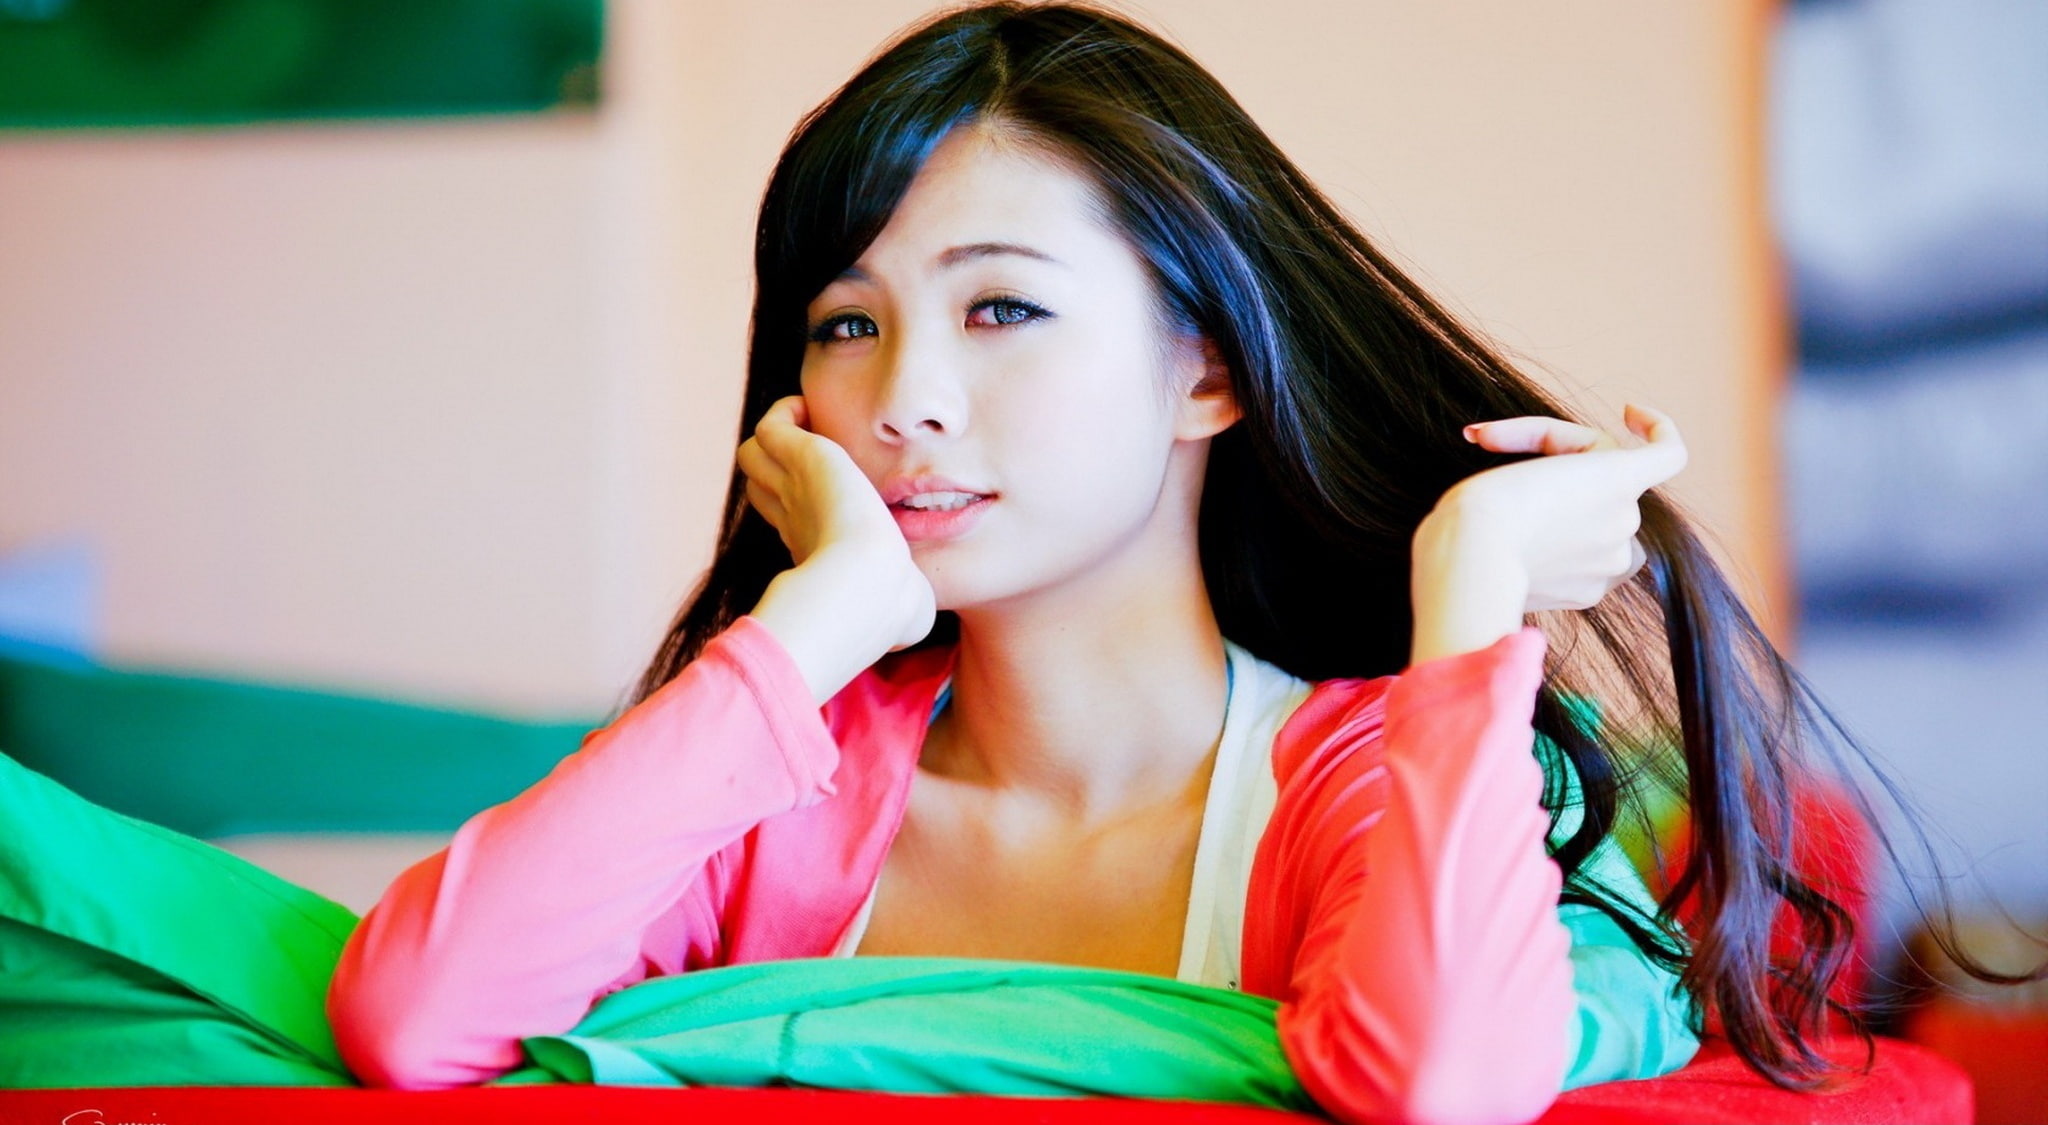 Asian ladies personal web pages